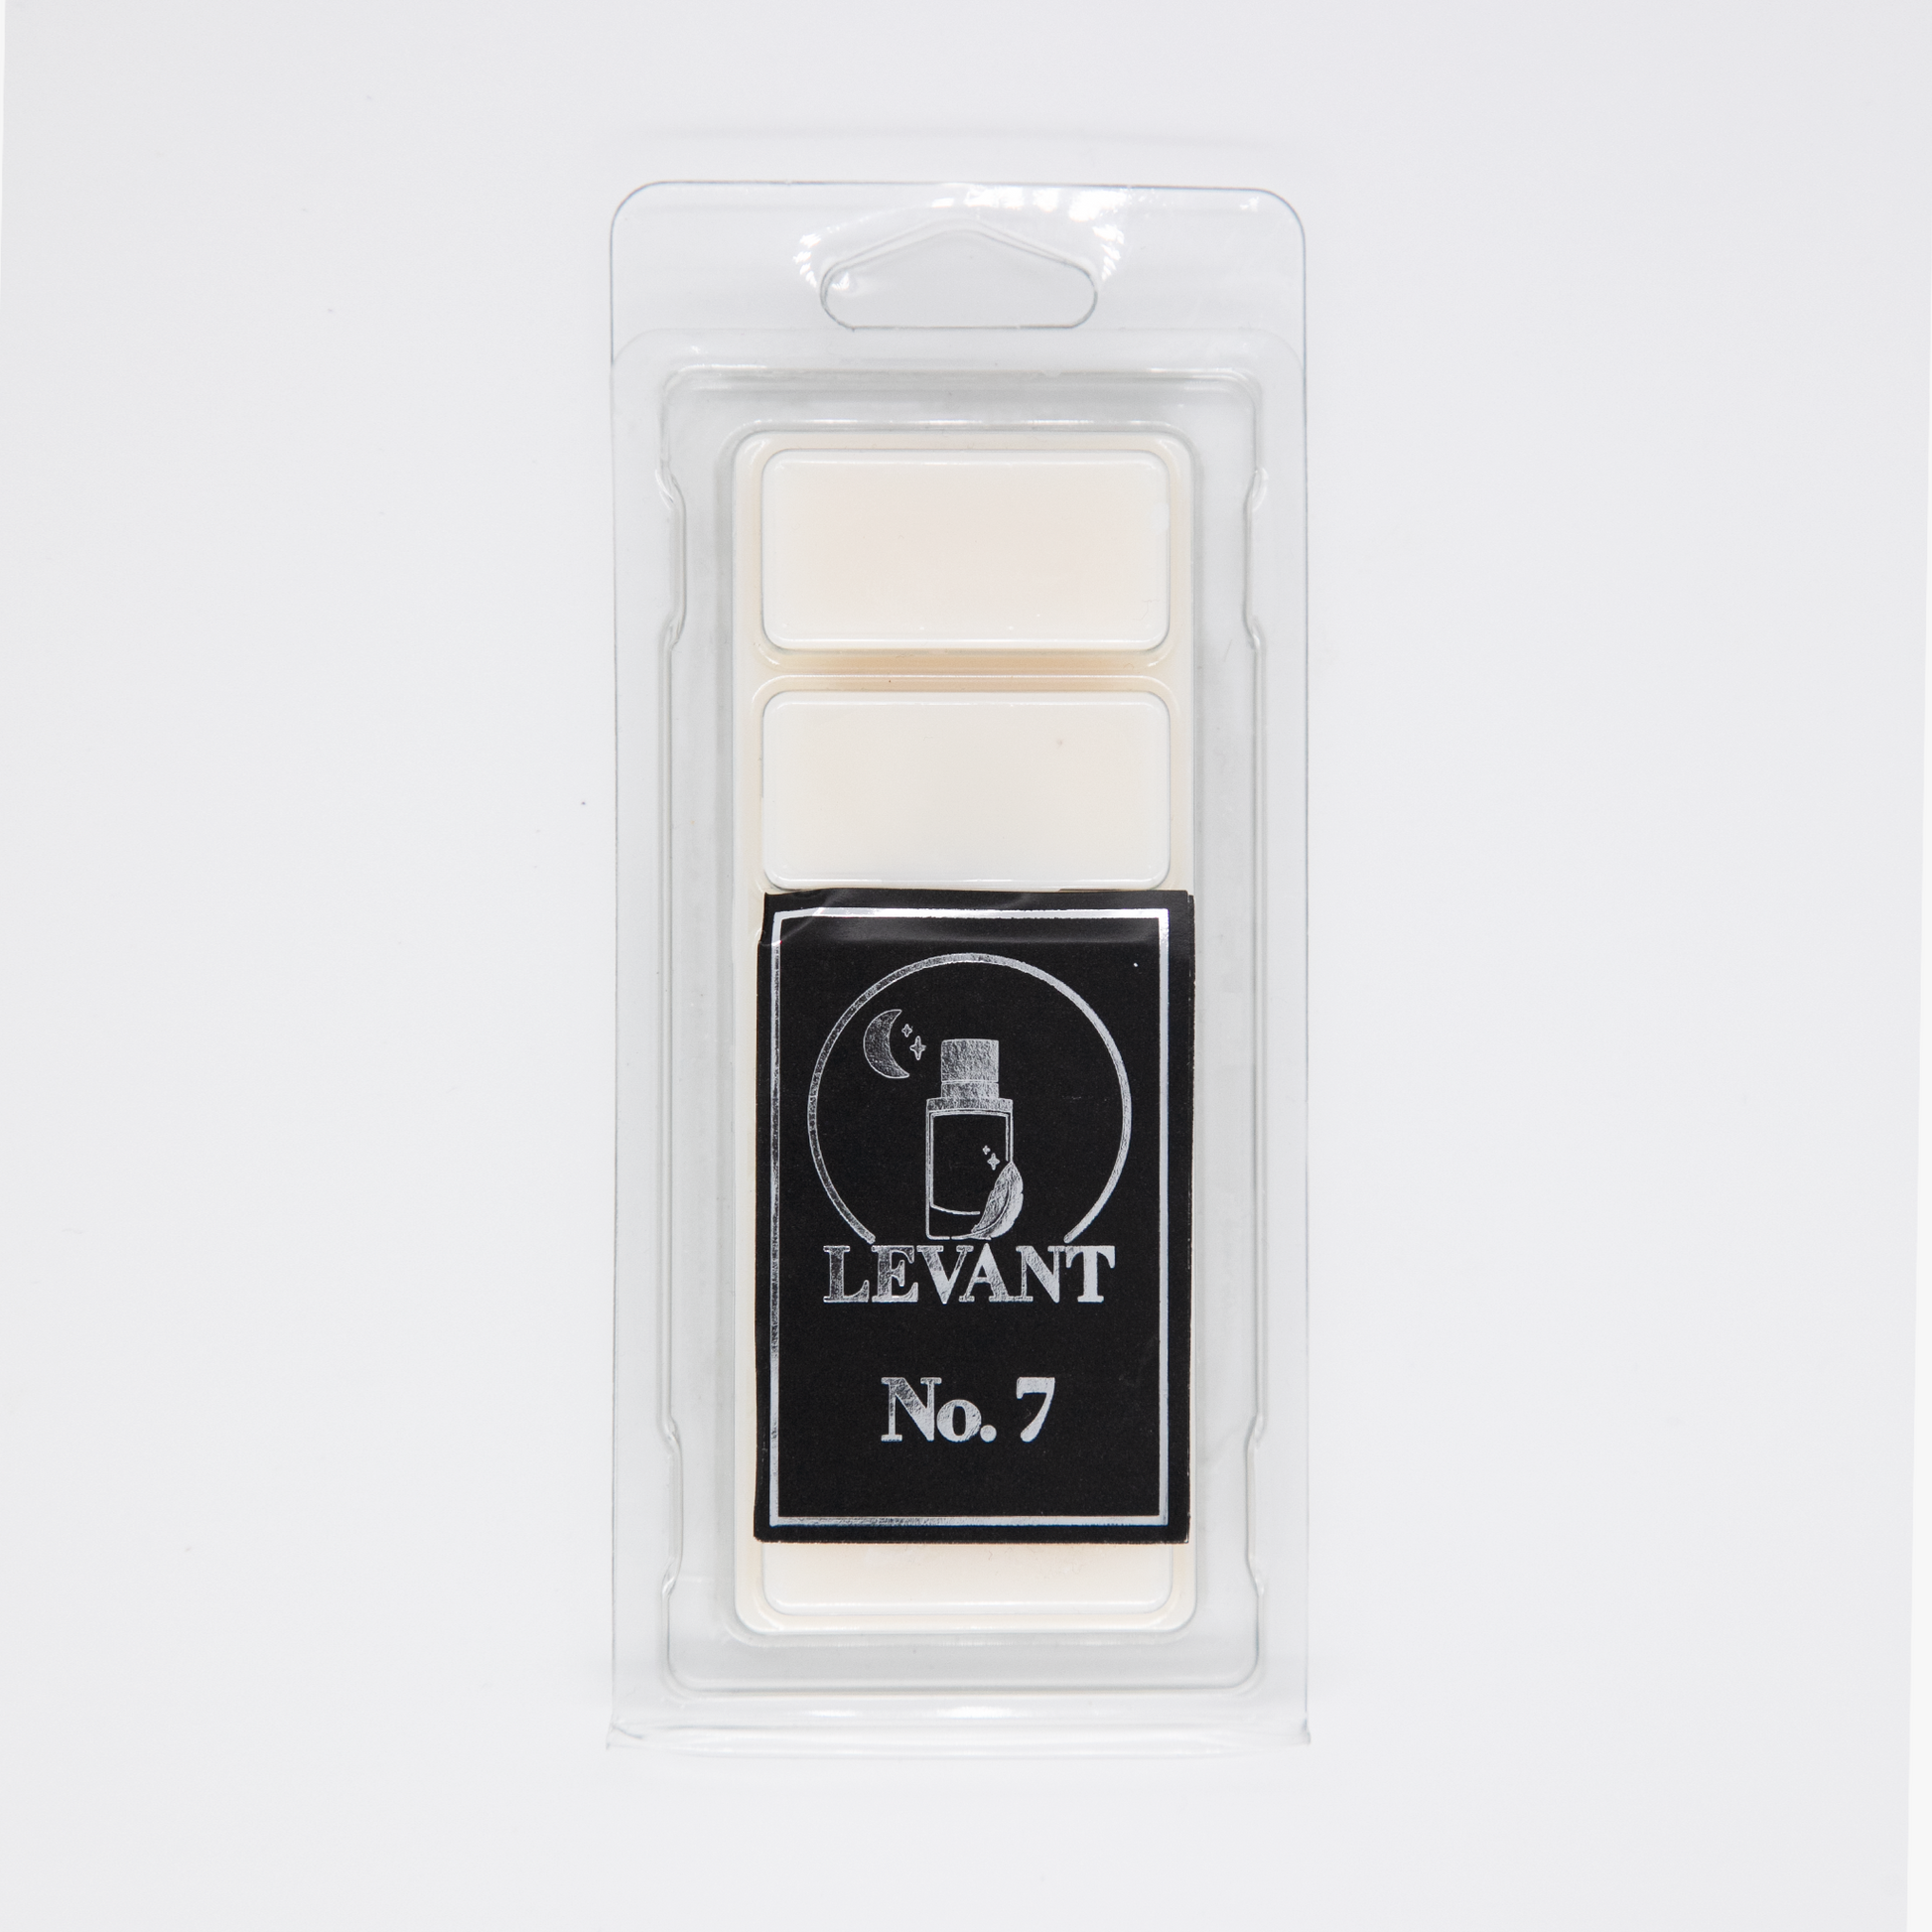 Wax Melt No. 7 with packaging